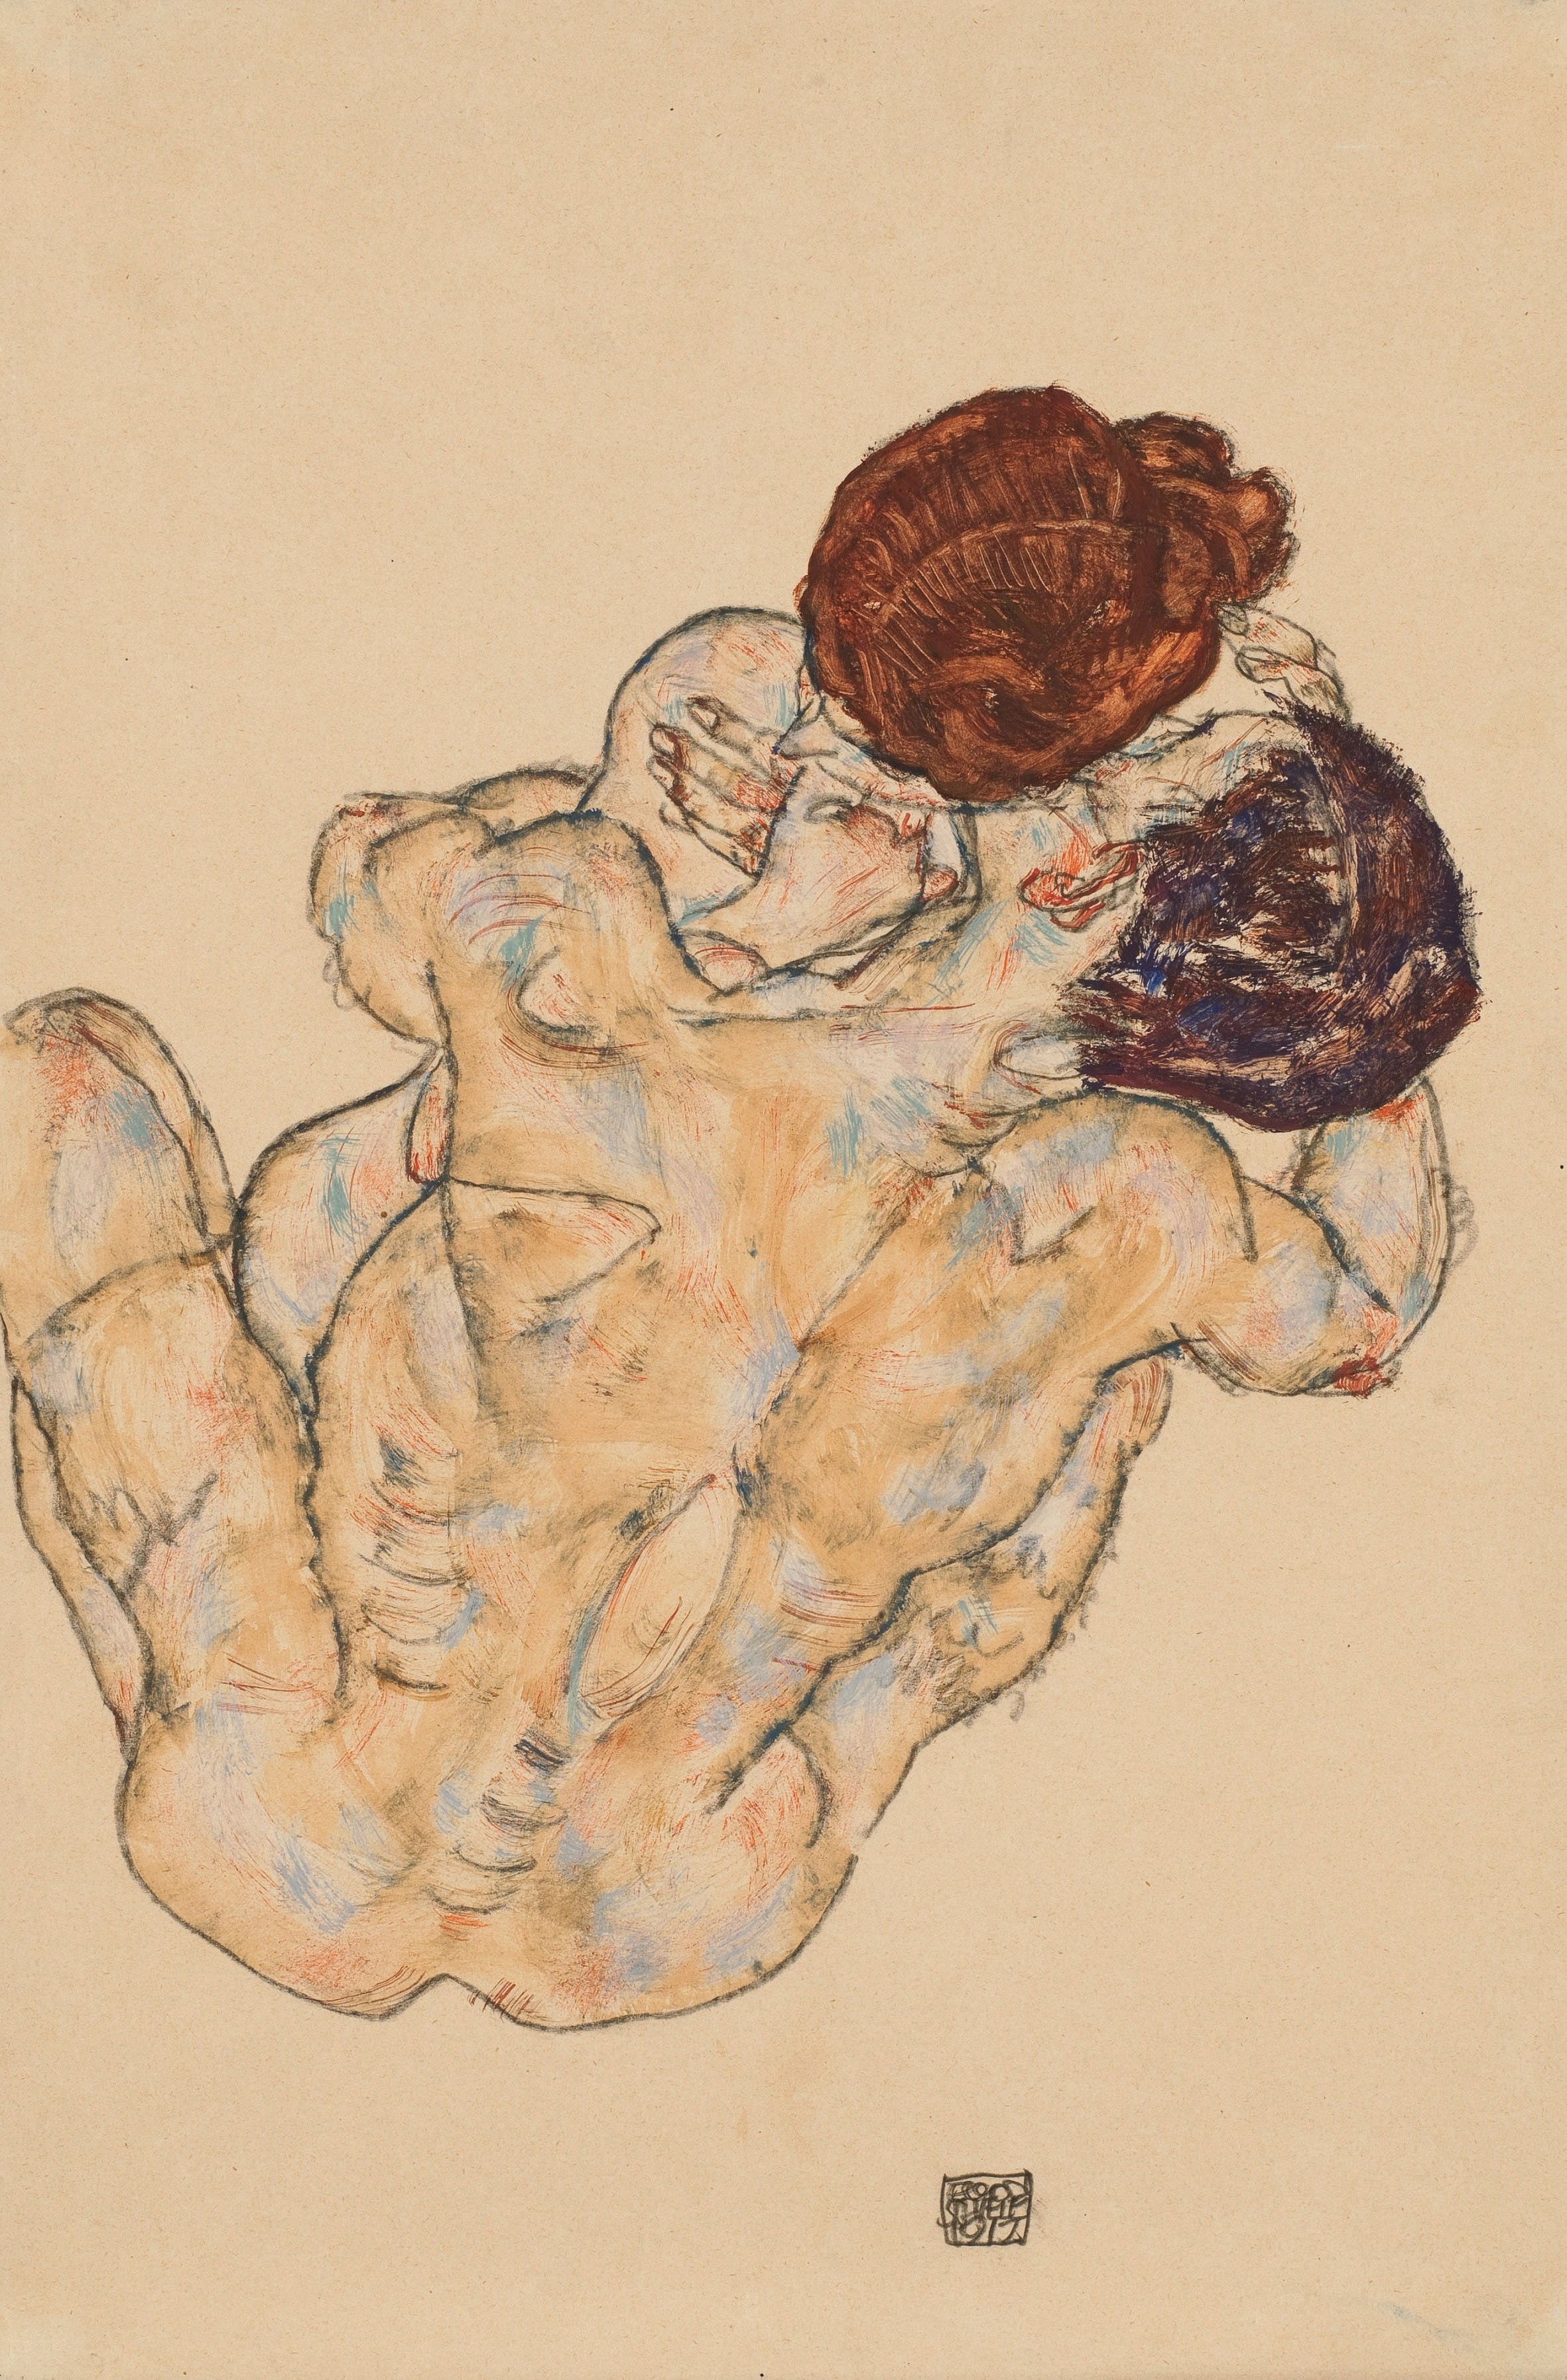 The Embrace by Egon Schiele - 1917 - 48.9 x 28.9 cm private collection